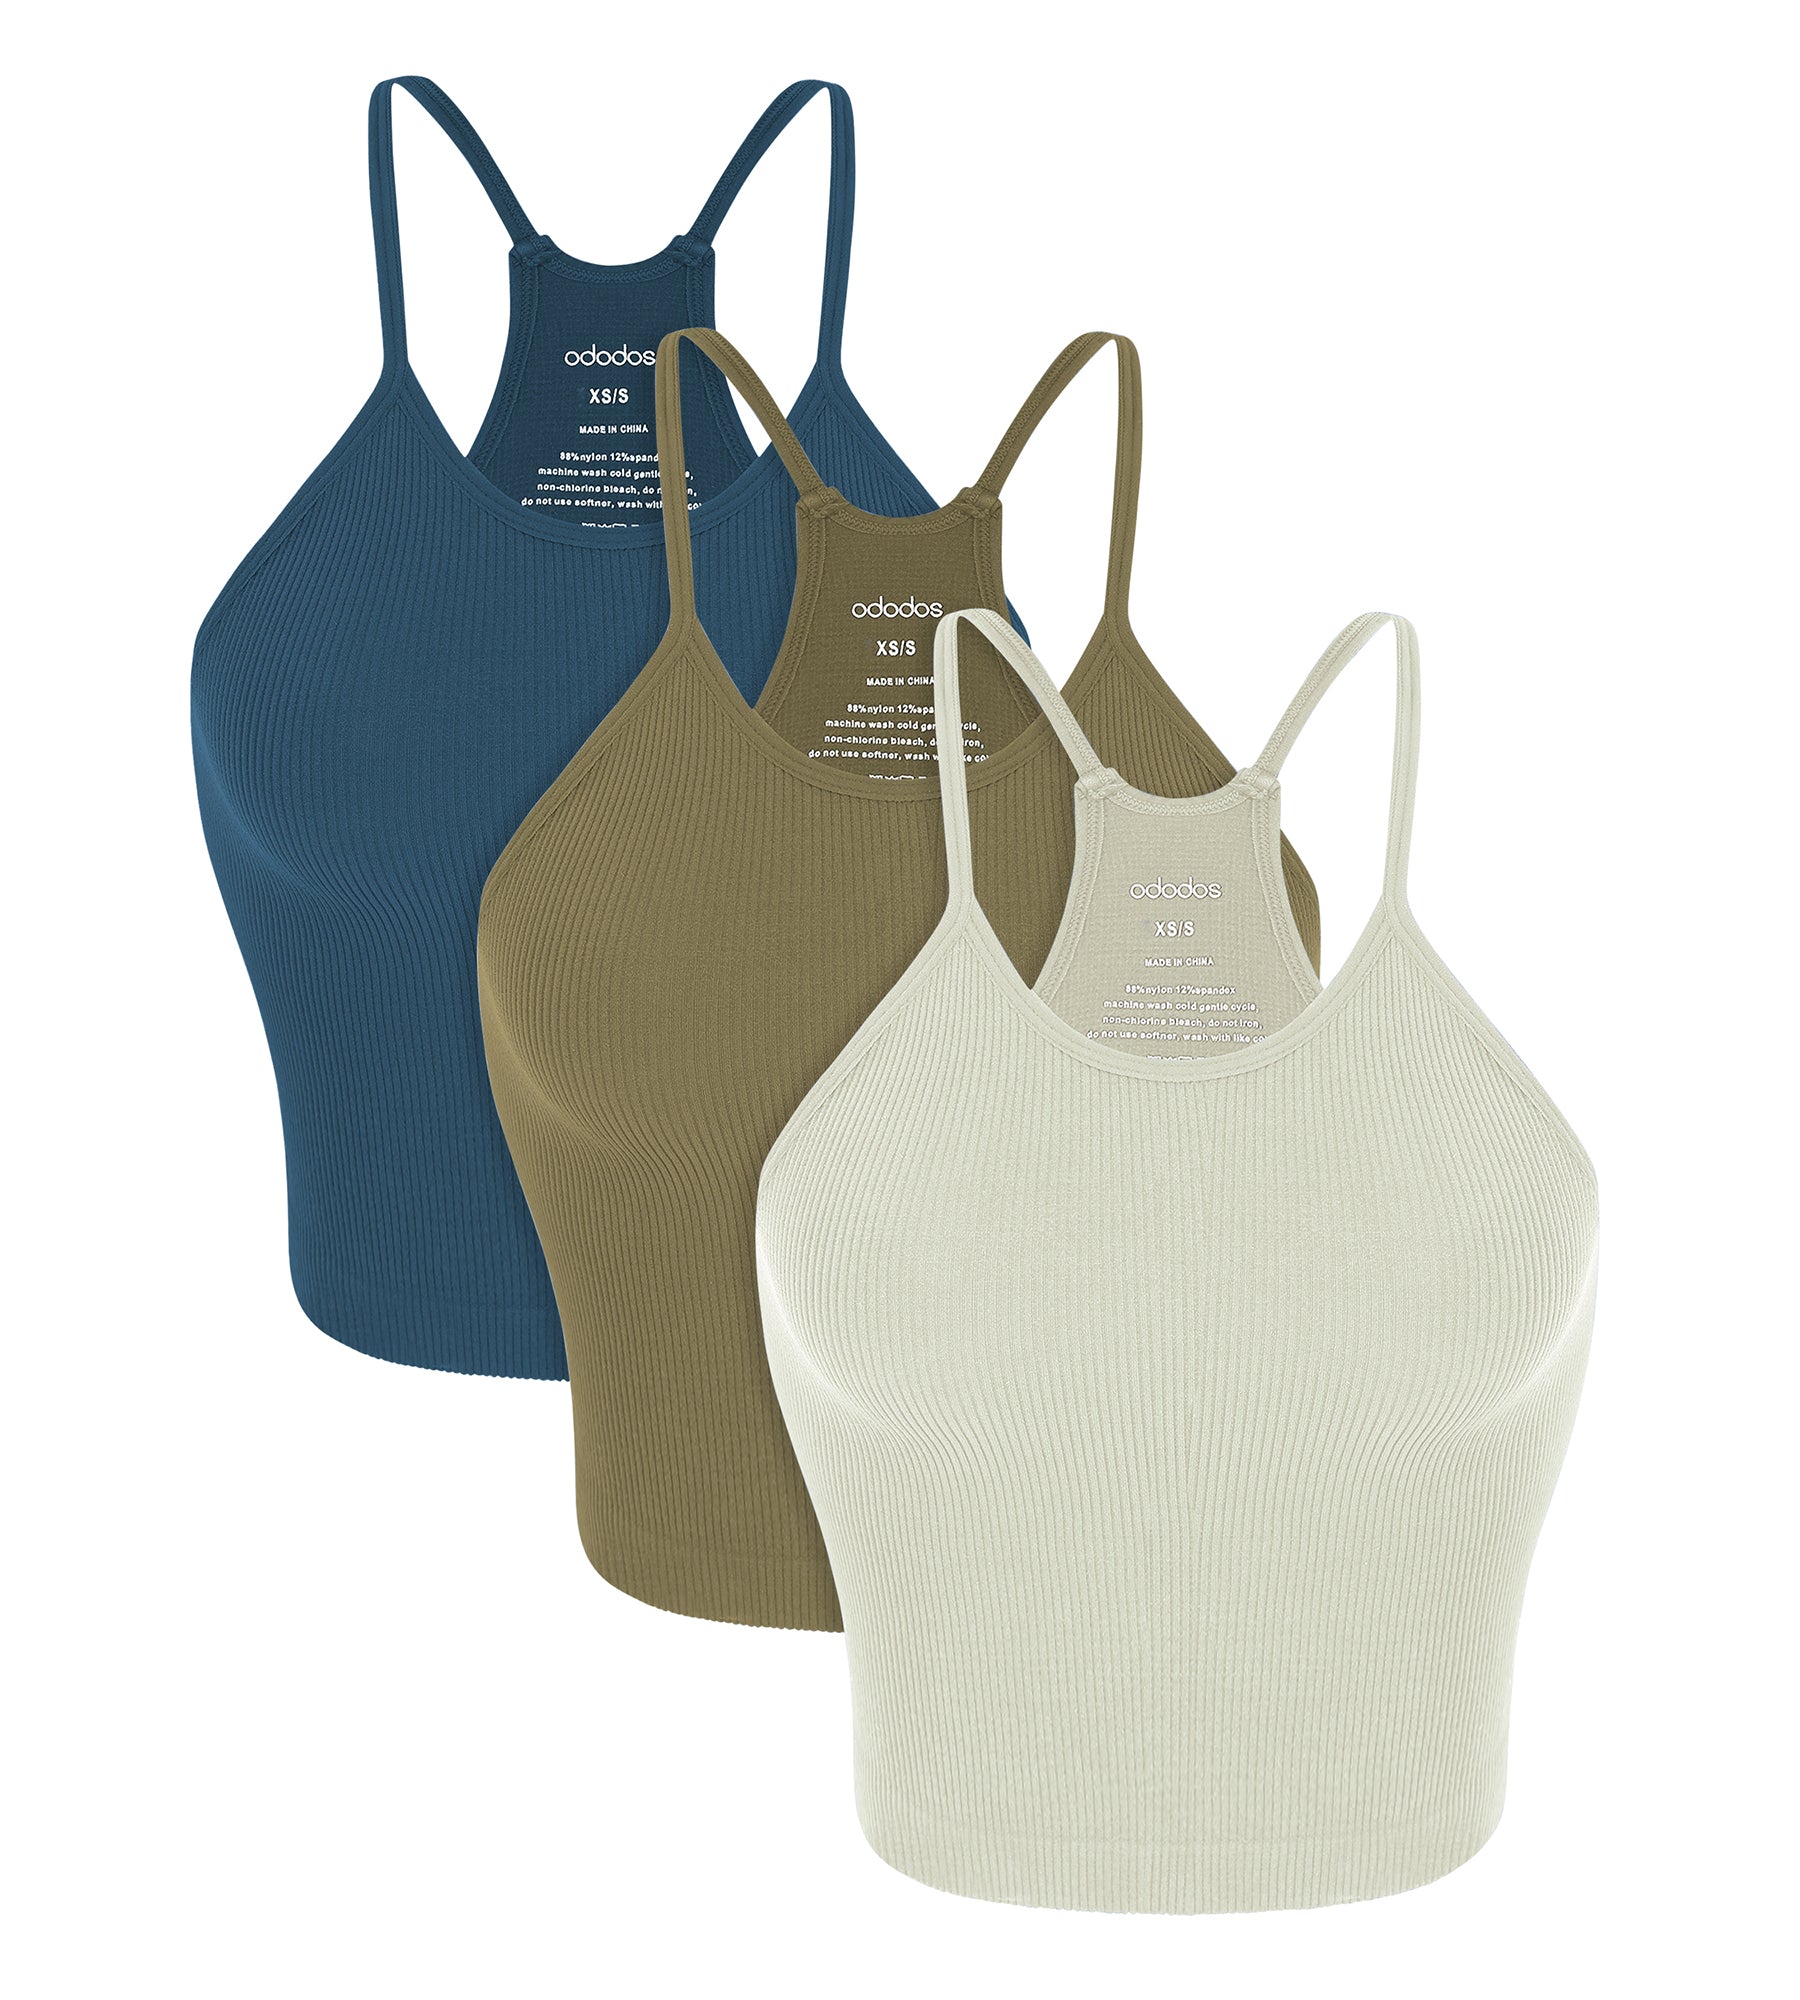 3-Pack Seamless Rib-Knit Camisole Lint+Nutria+Blue Ashes - ododos